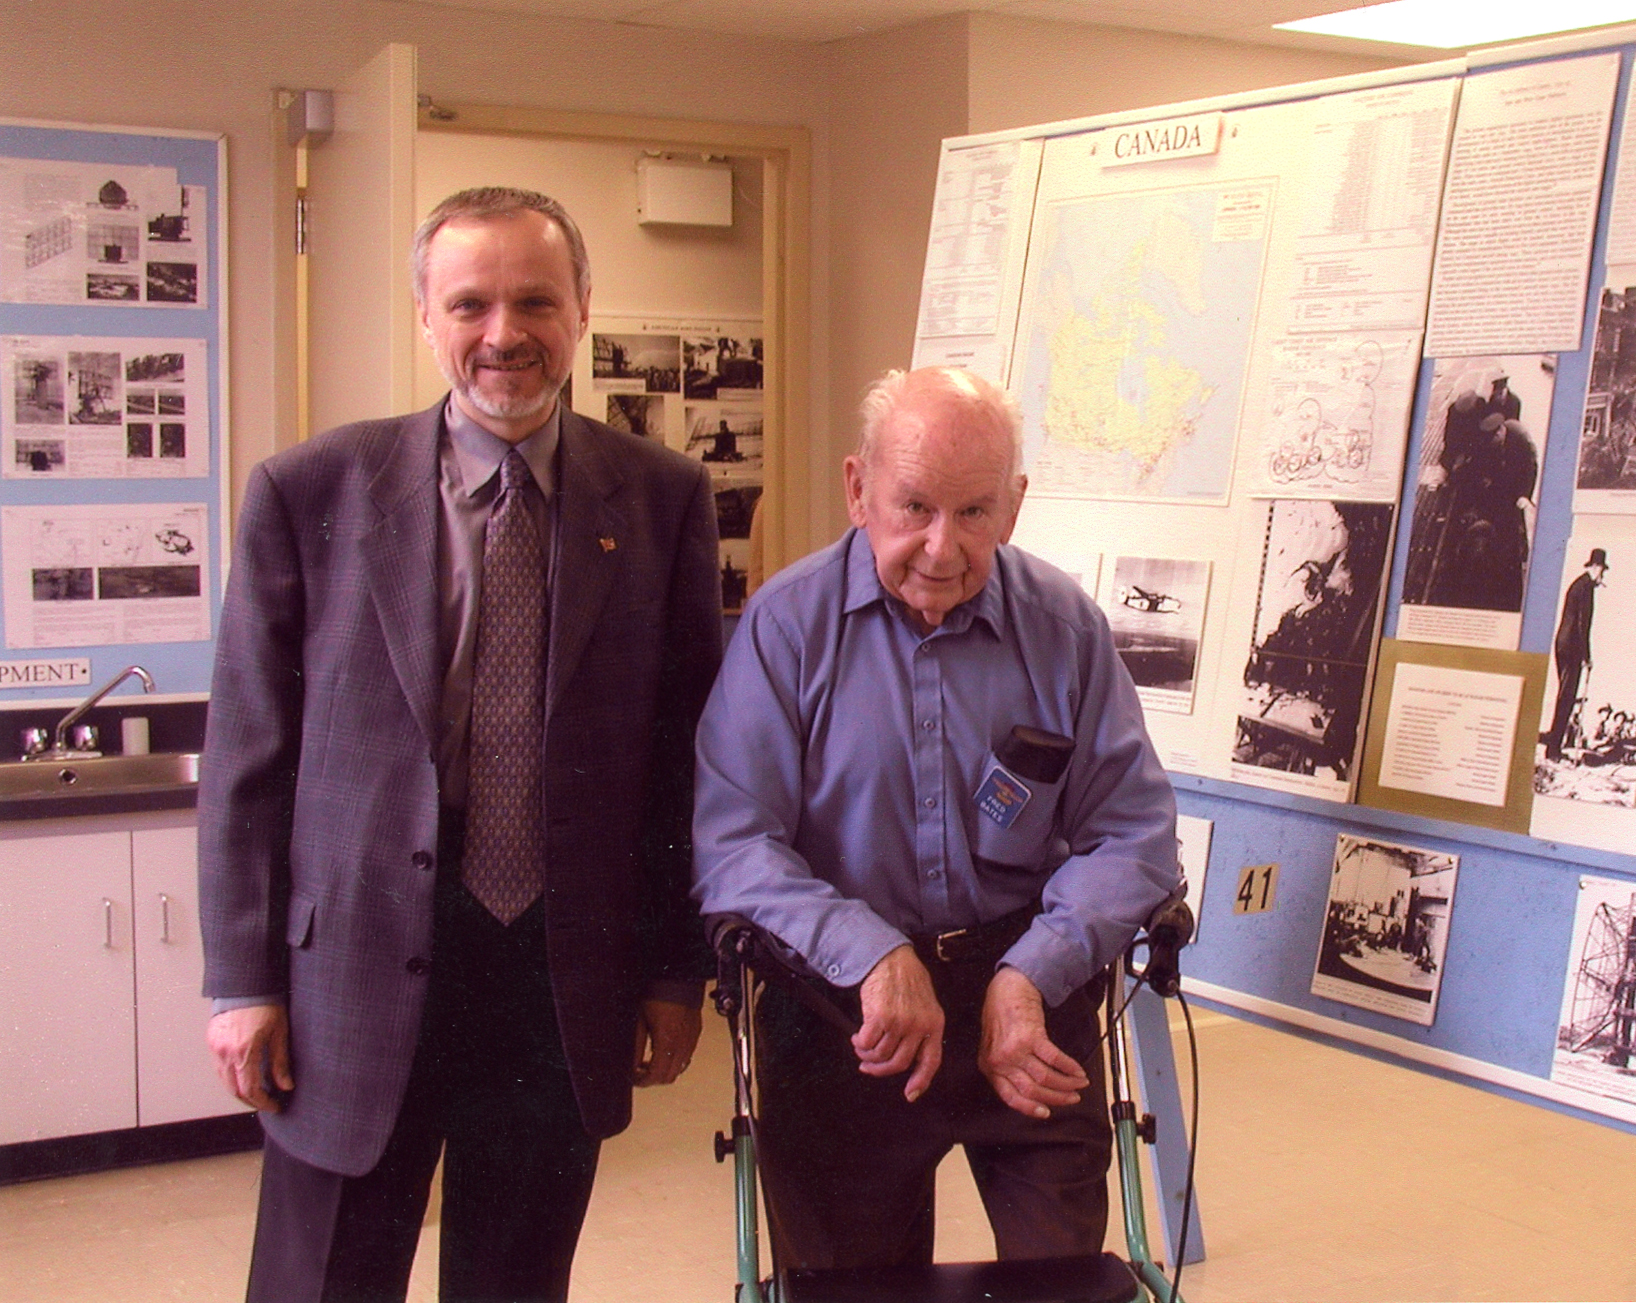 An elderly man in a blue shirt and walker stands beside a man in a suit and tie; exhibit panels to right and in background.